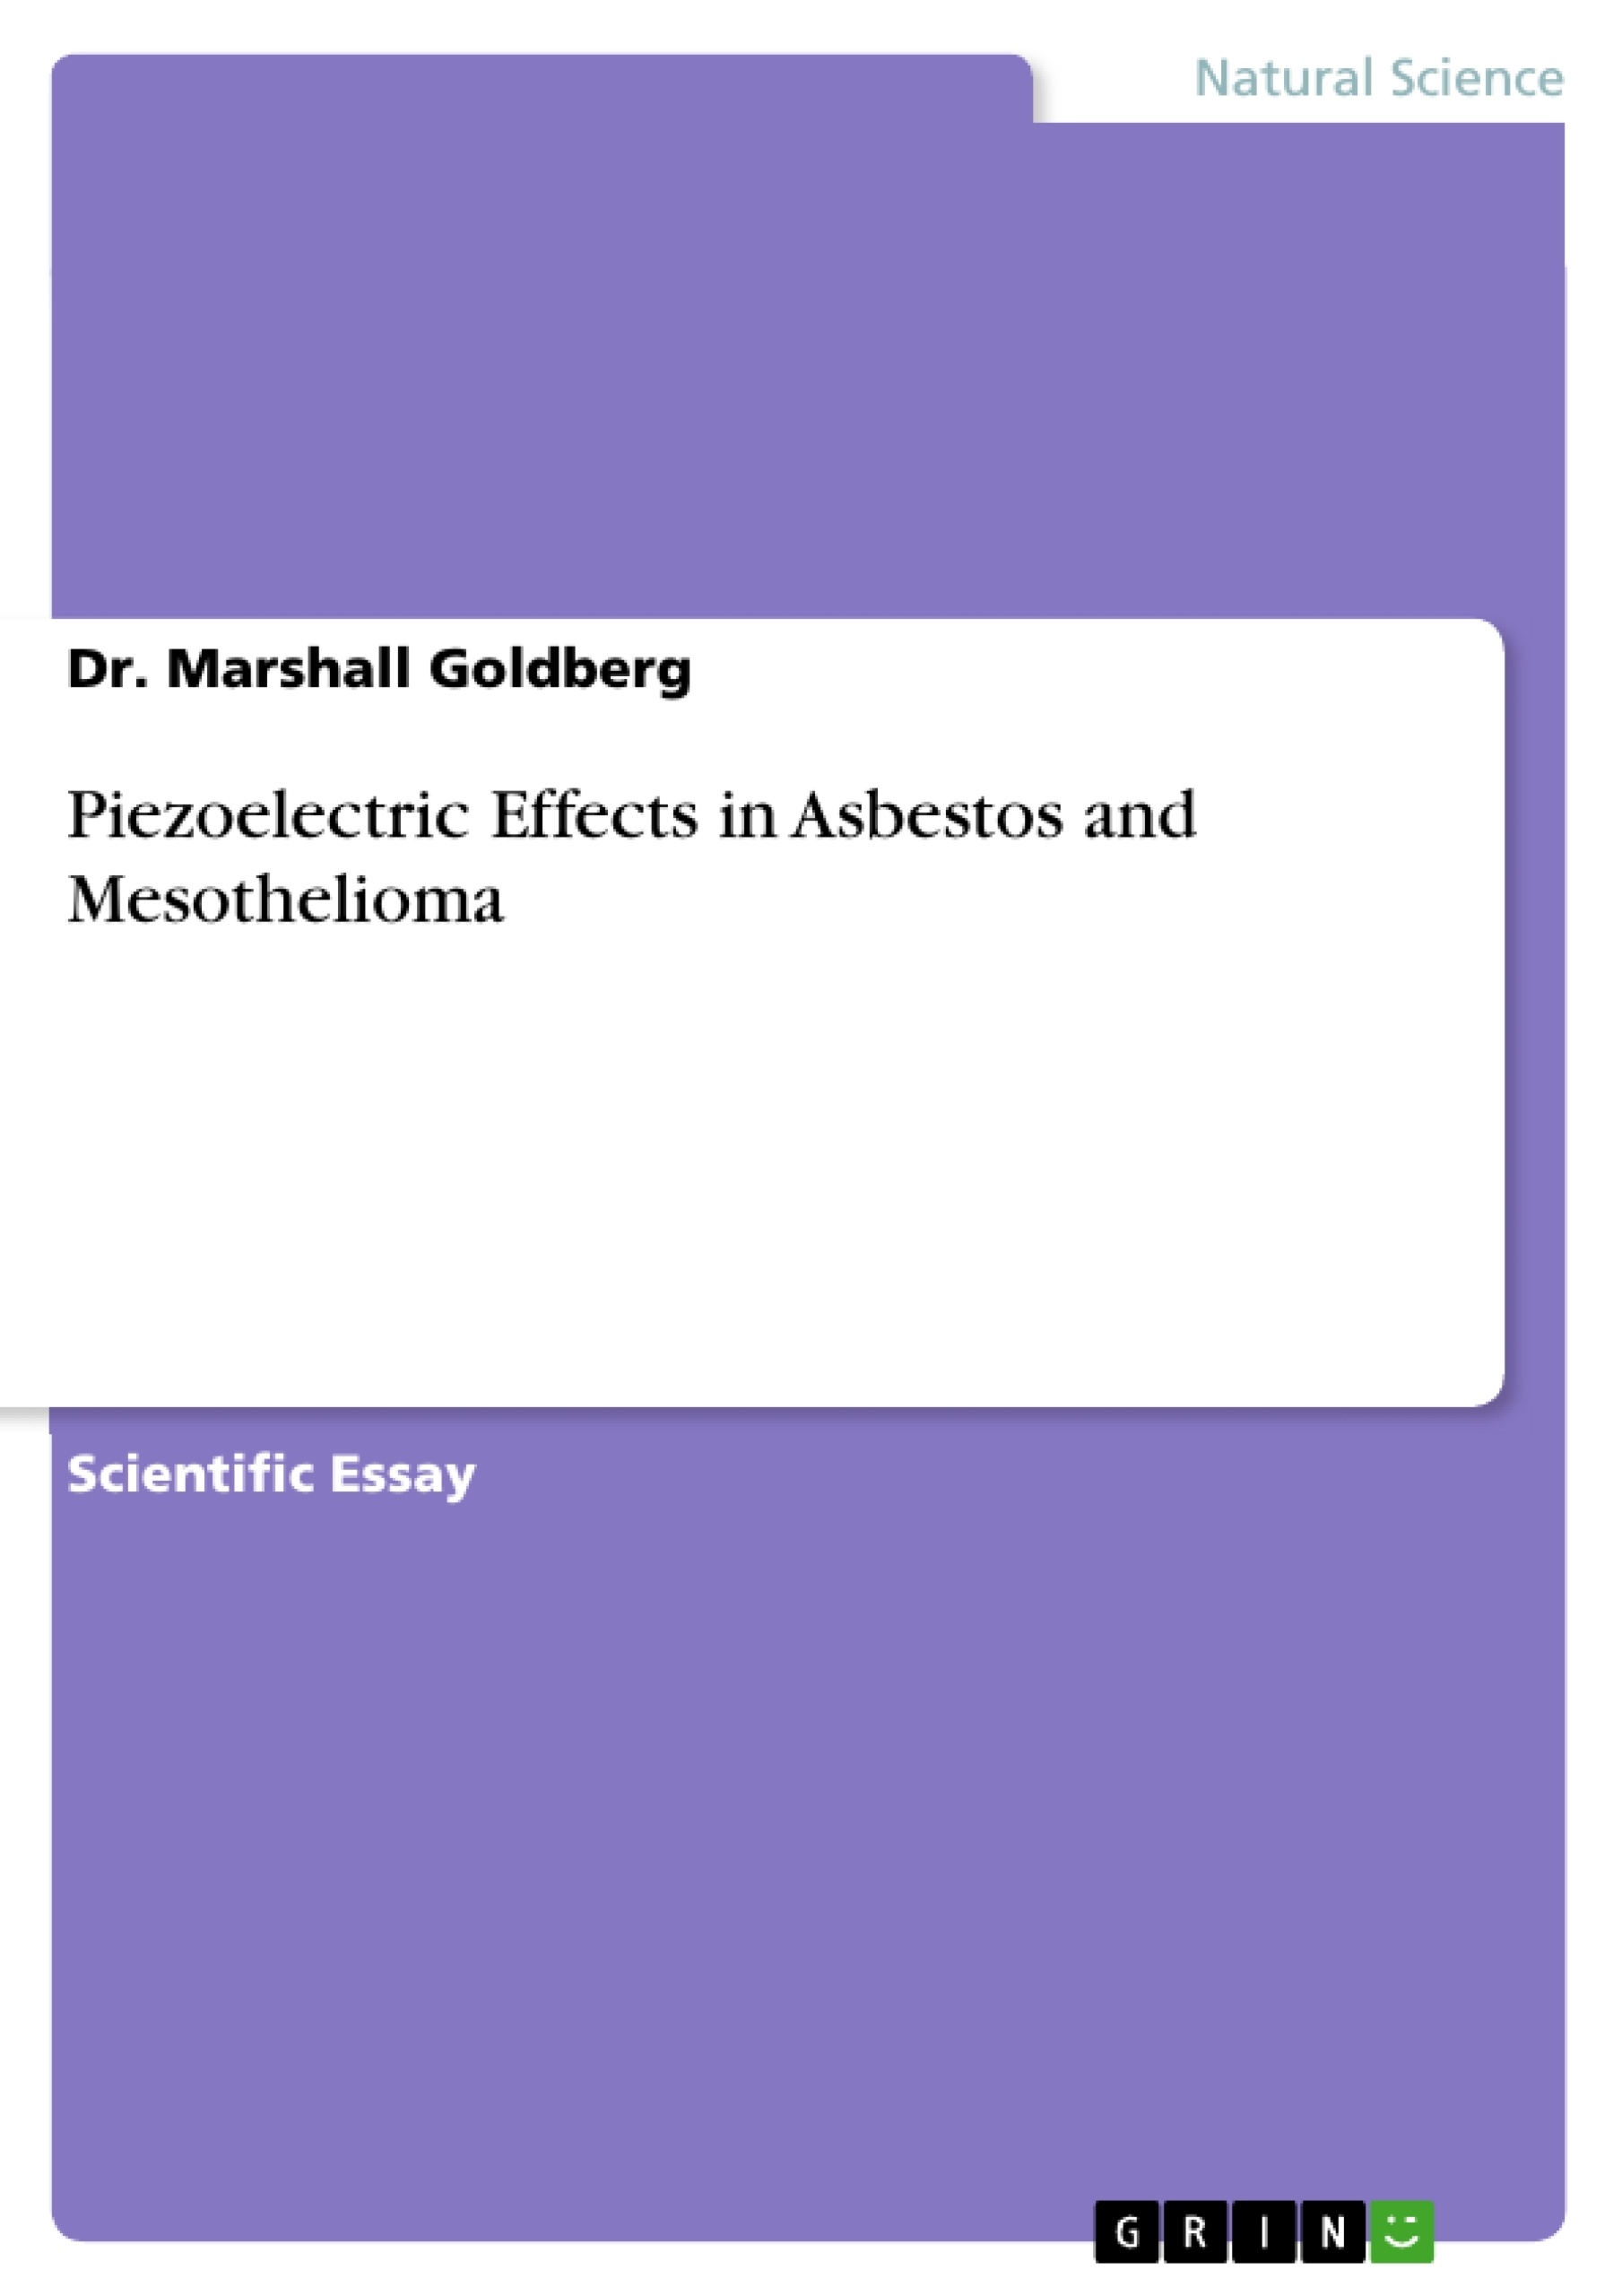 Titre: Piezoelectric Effects in Asbestos and Mesothelioma